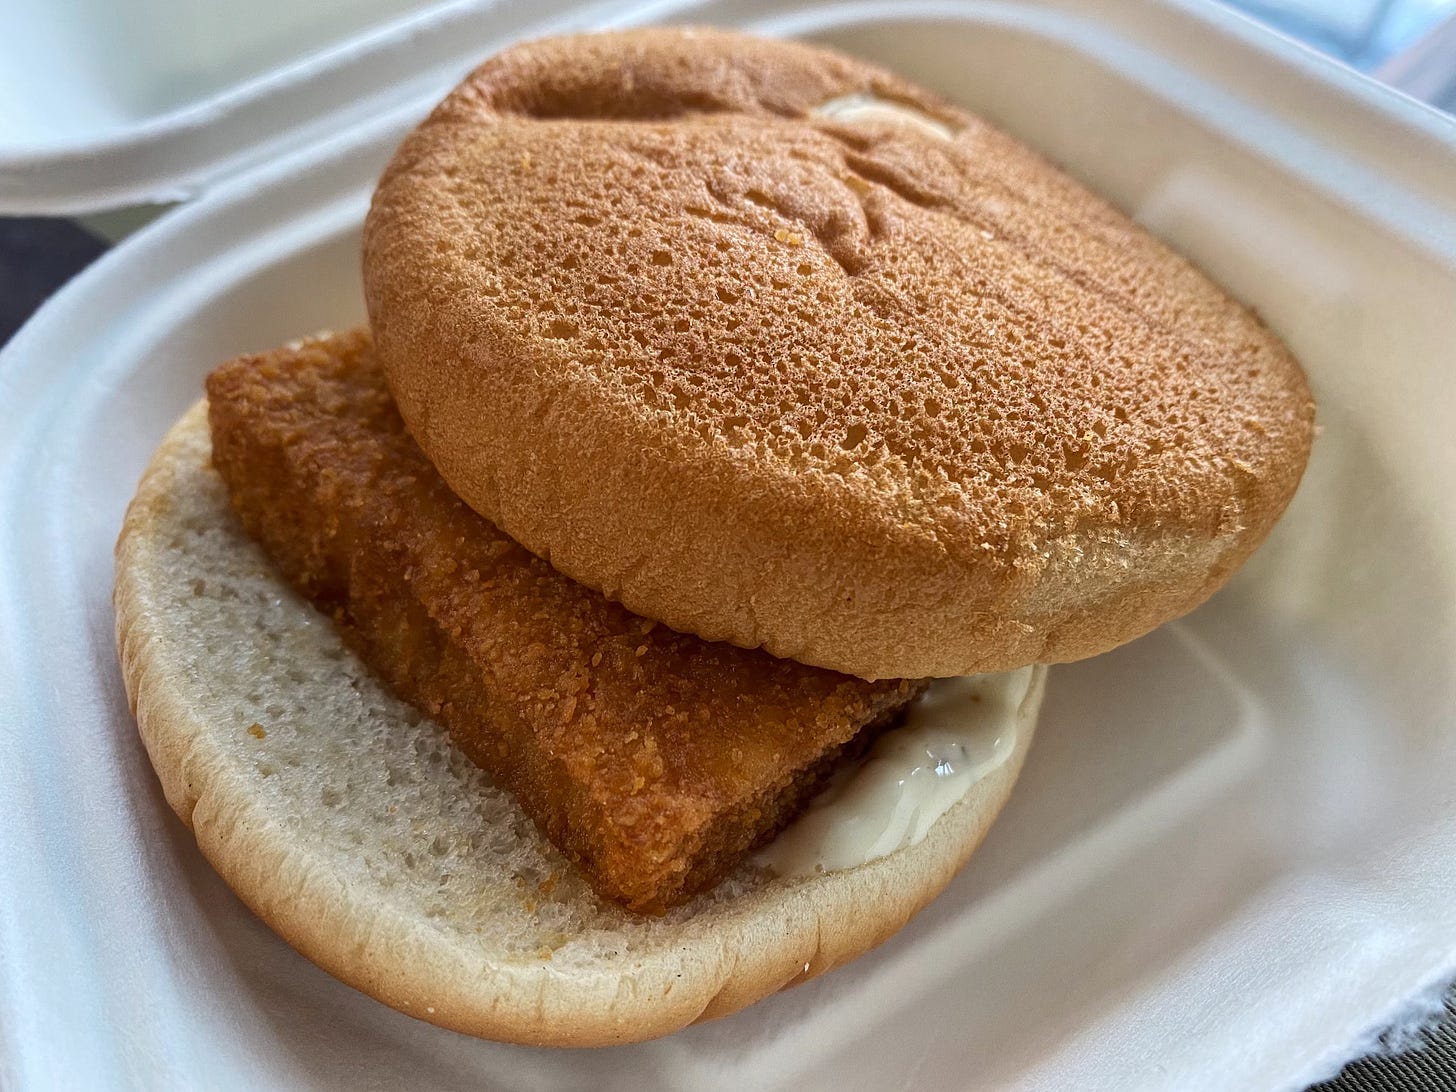 McDonald's Filet-O-Fish, badly put together, with the bun totally askew